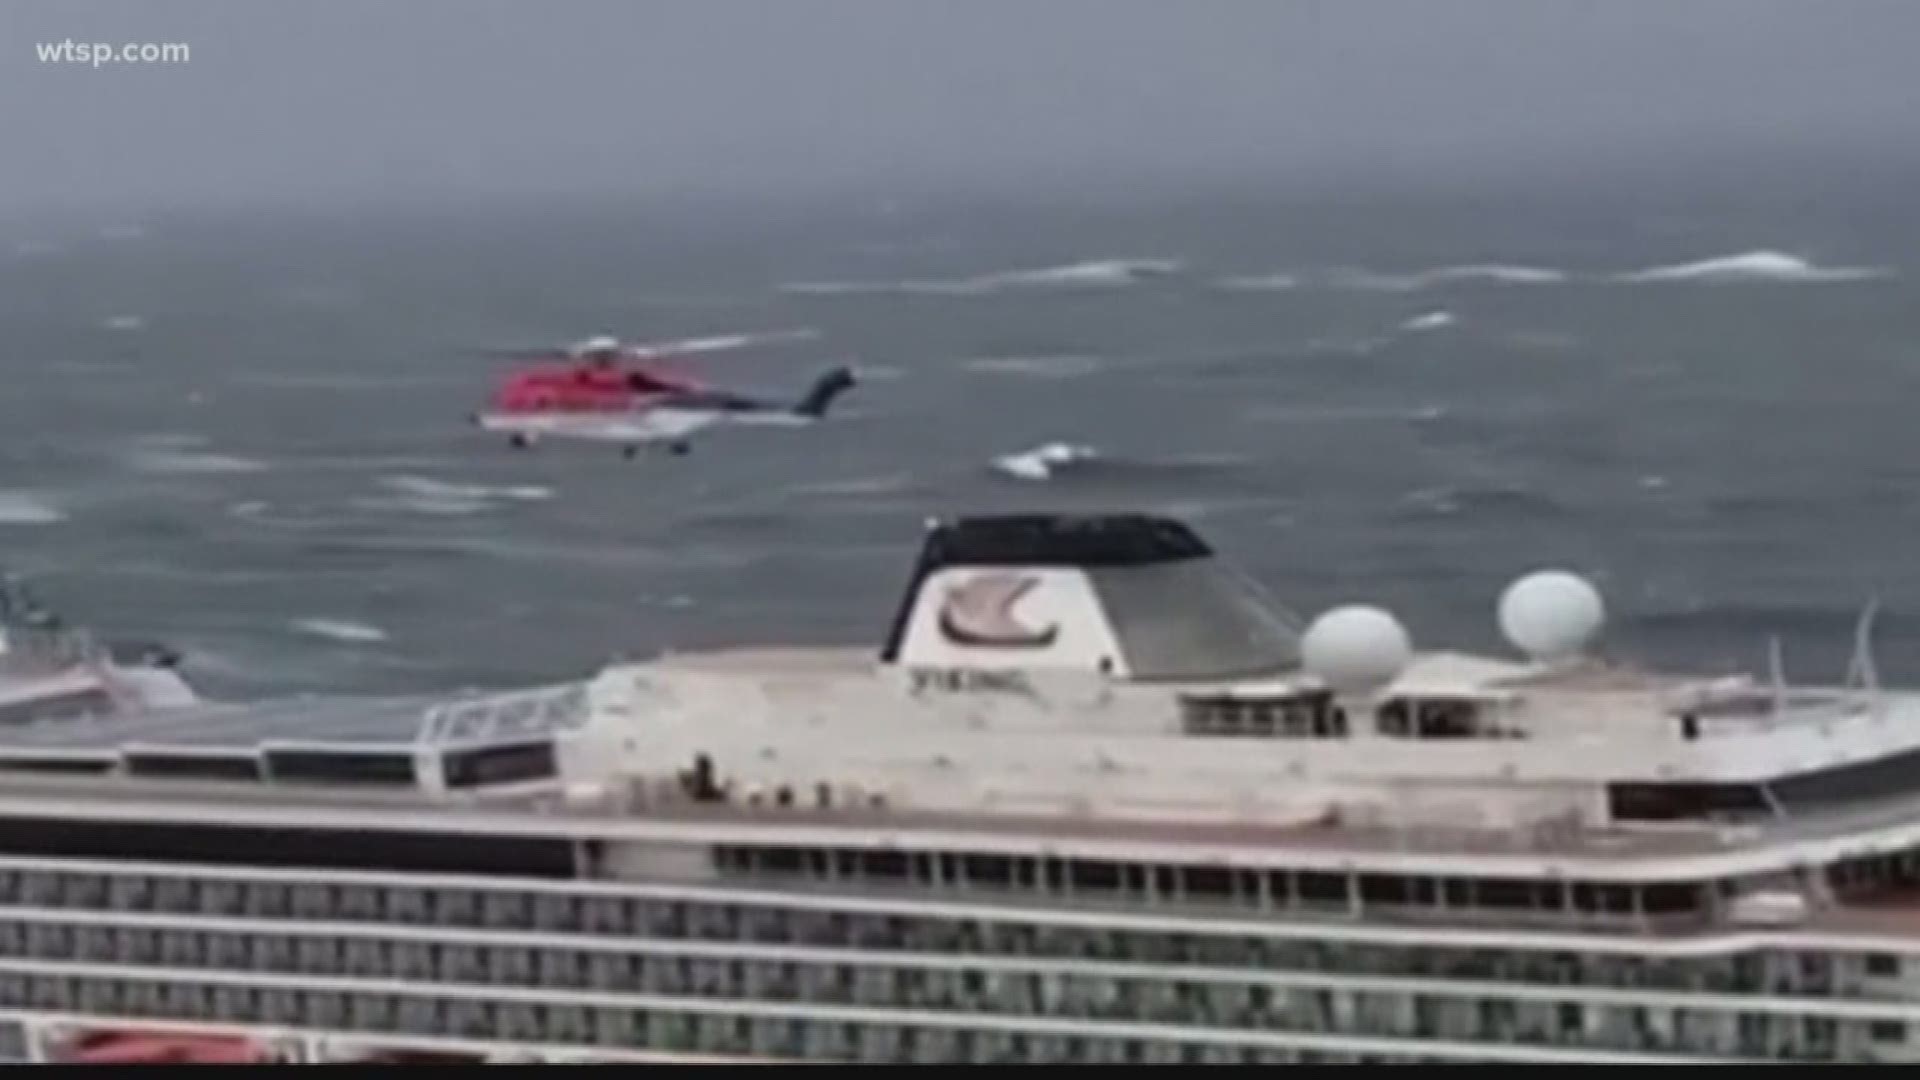 Rescue workers off Norway's western coast rushed to evacuate 1,300 passengers and crew from a disabled cruise ship by helicopter on Saturday, winching them one-by-one to safety as heaving waves tossed the ship from side to side and high winds battered the operation.